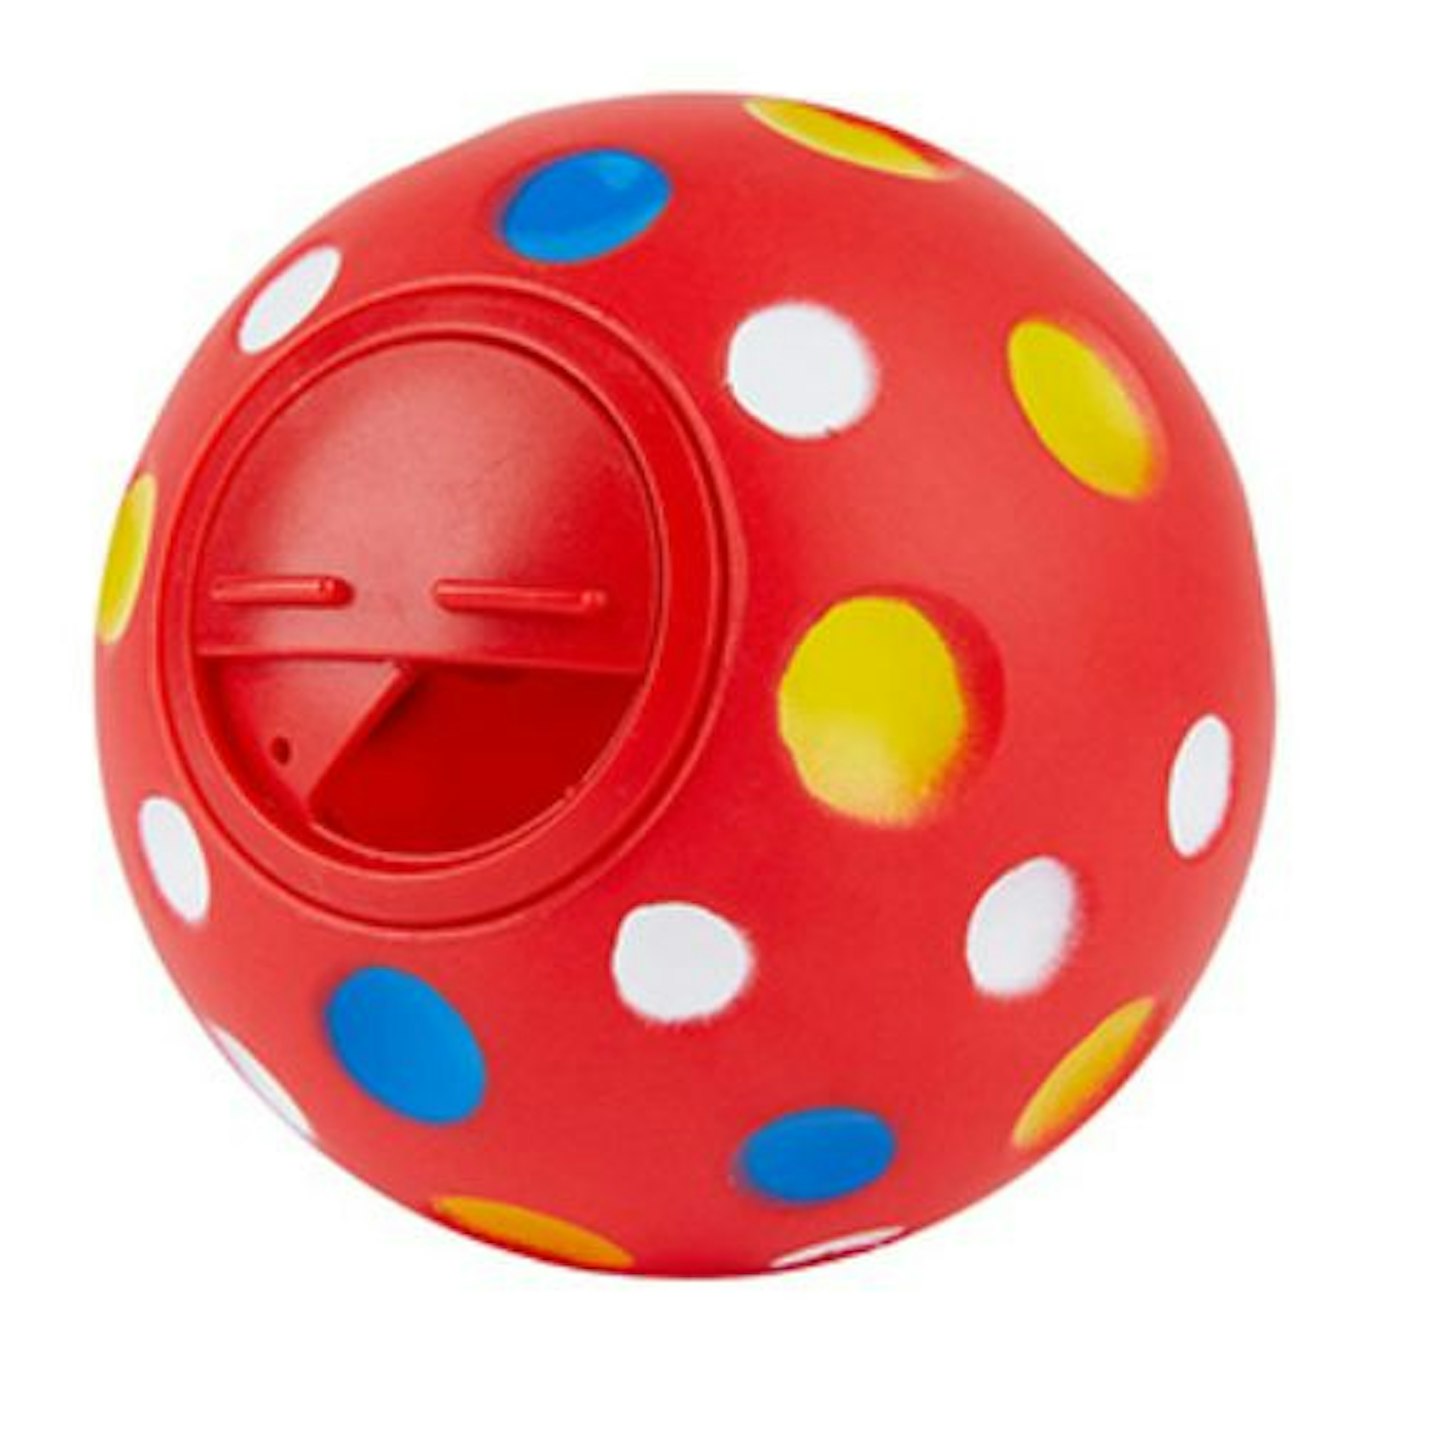 Pets at Home Training Treat Ball Dog Toy